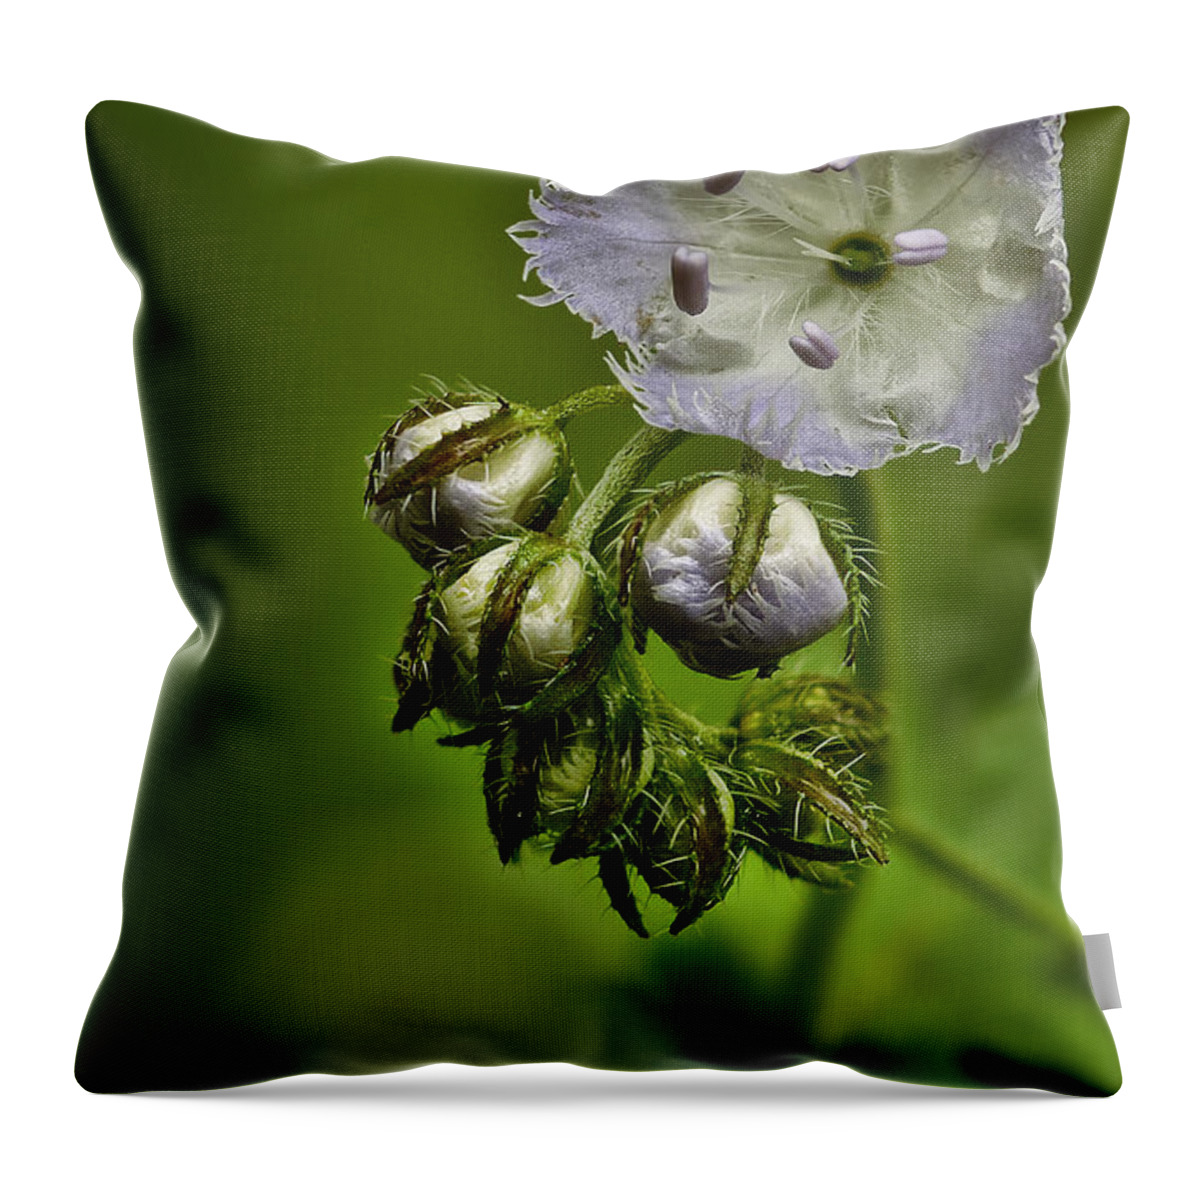 2011 Throw Pillow featuring the photograph Miami Mist by Robert Charity